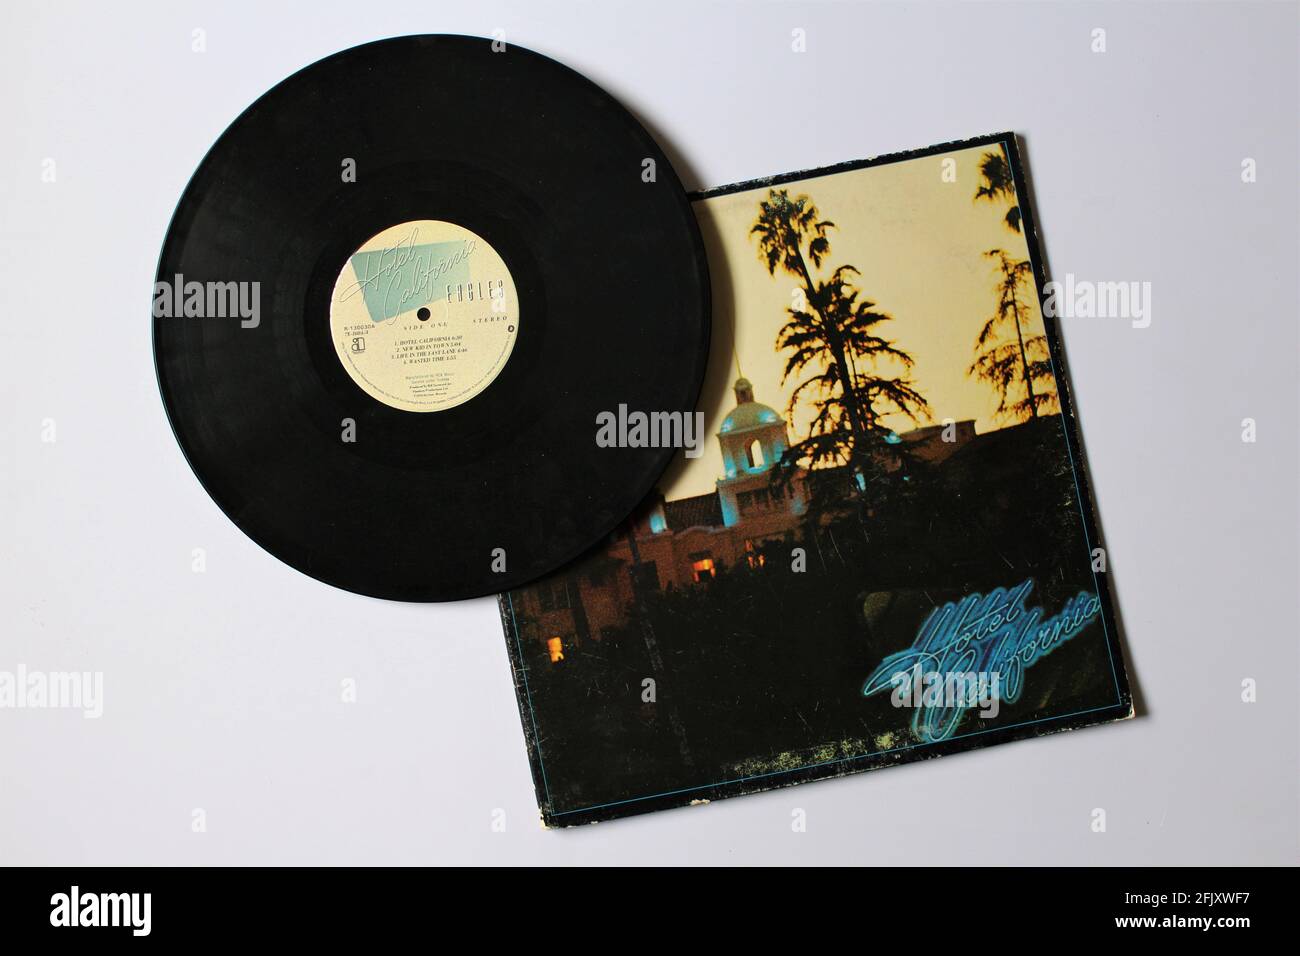 Rock band, The Eagles music album on vinyl record LP disc. Titled: Hotel  California Stock Photo - Alamy